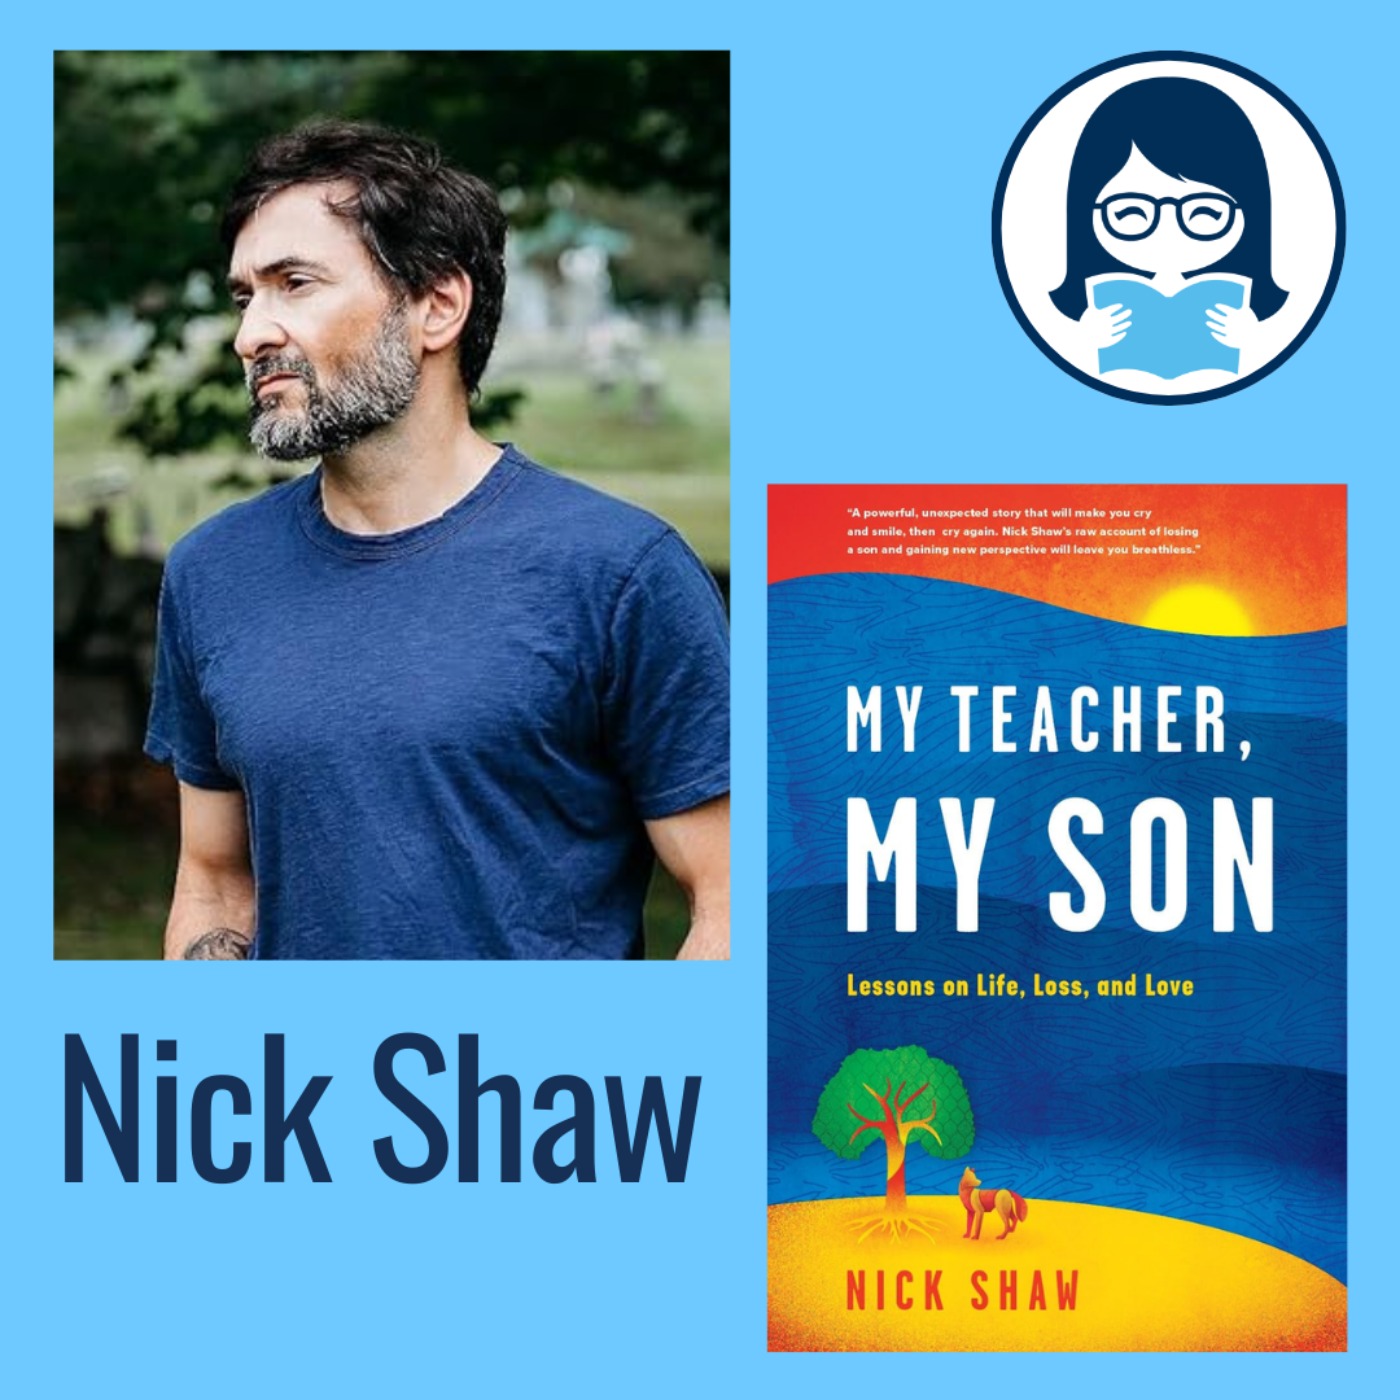 Nick Shaw, MY TEACHER, MY SON: Lessons on Life, Loss, and Love